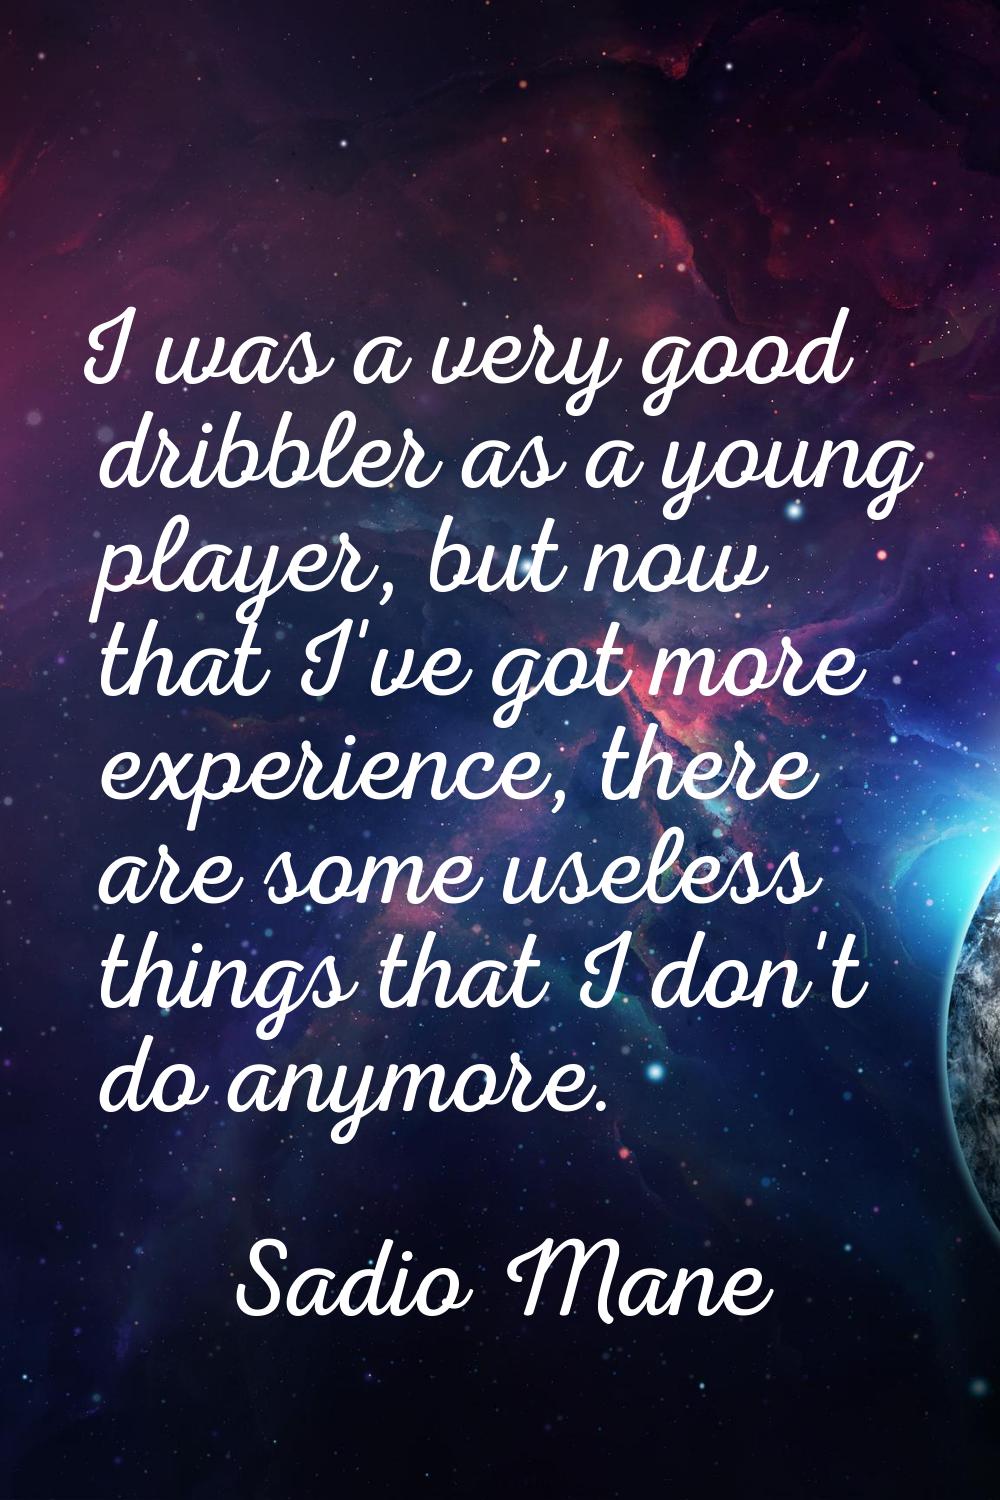 I was a very good dribbler as a young player, but now that I've got more experience, there are some